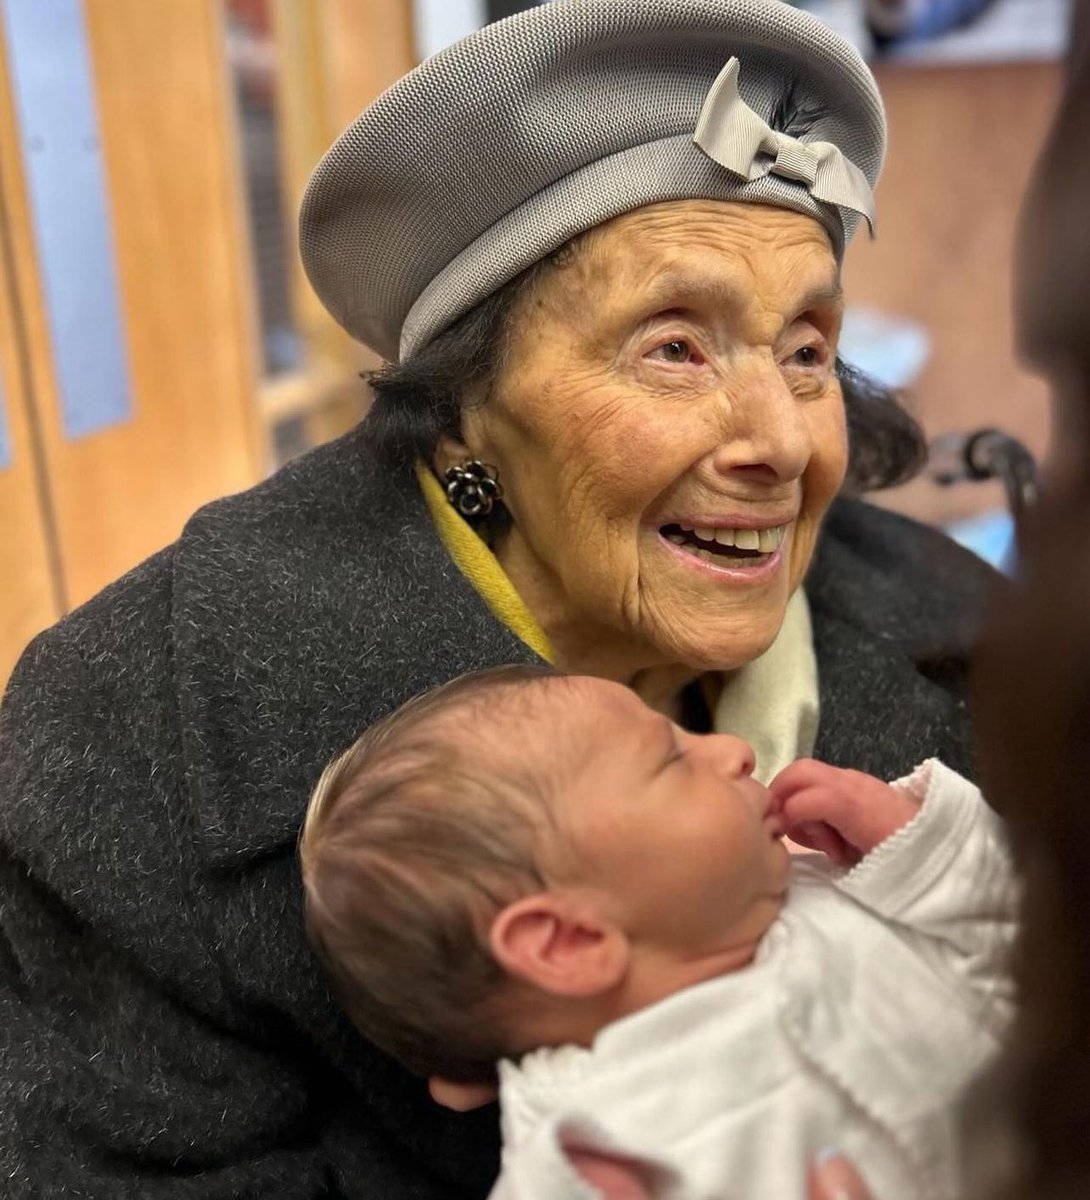 This week, my great-grandma, Lily Ebert, a 100-year-old Auschwitz survivor, became a great-great-grandma. “I never expected to survive the Holocaust. Now I have five beautiful generations. The Nazis did not win!” From near-death at Auschwitz to five generations of Jewish life.…